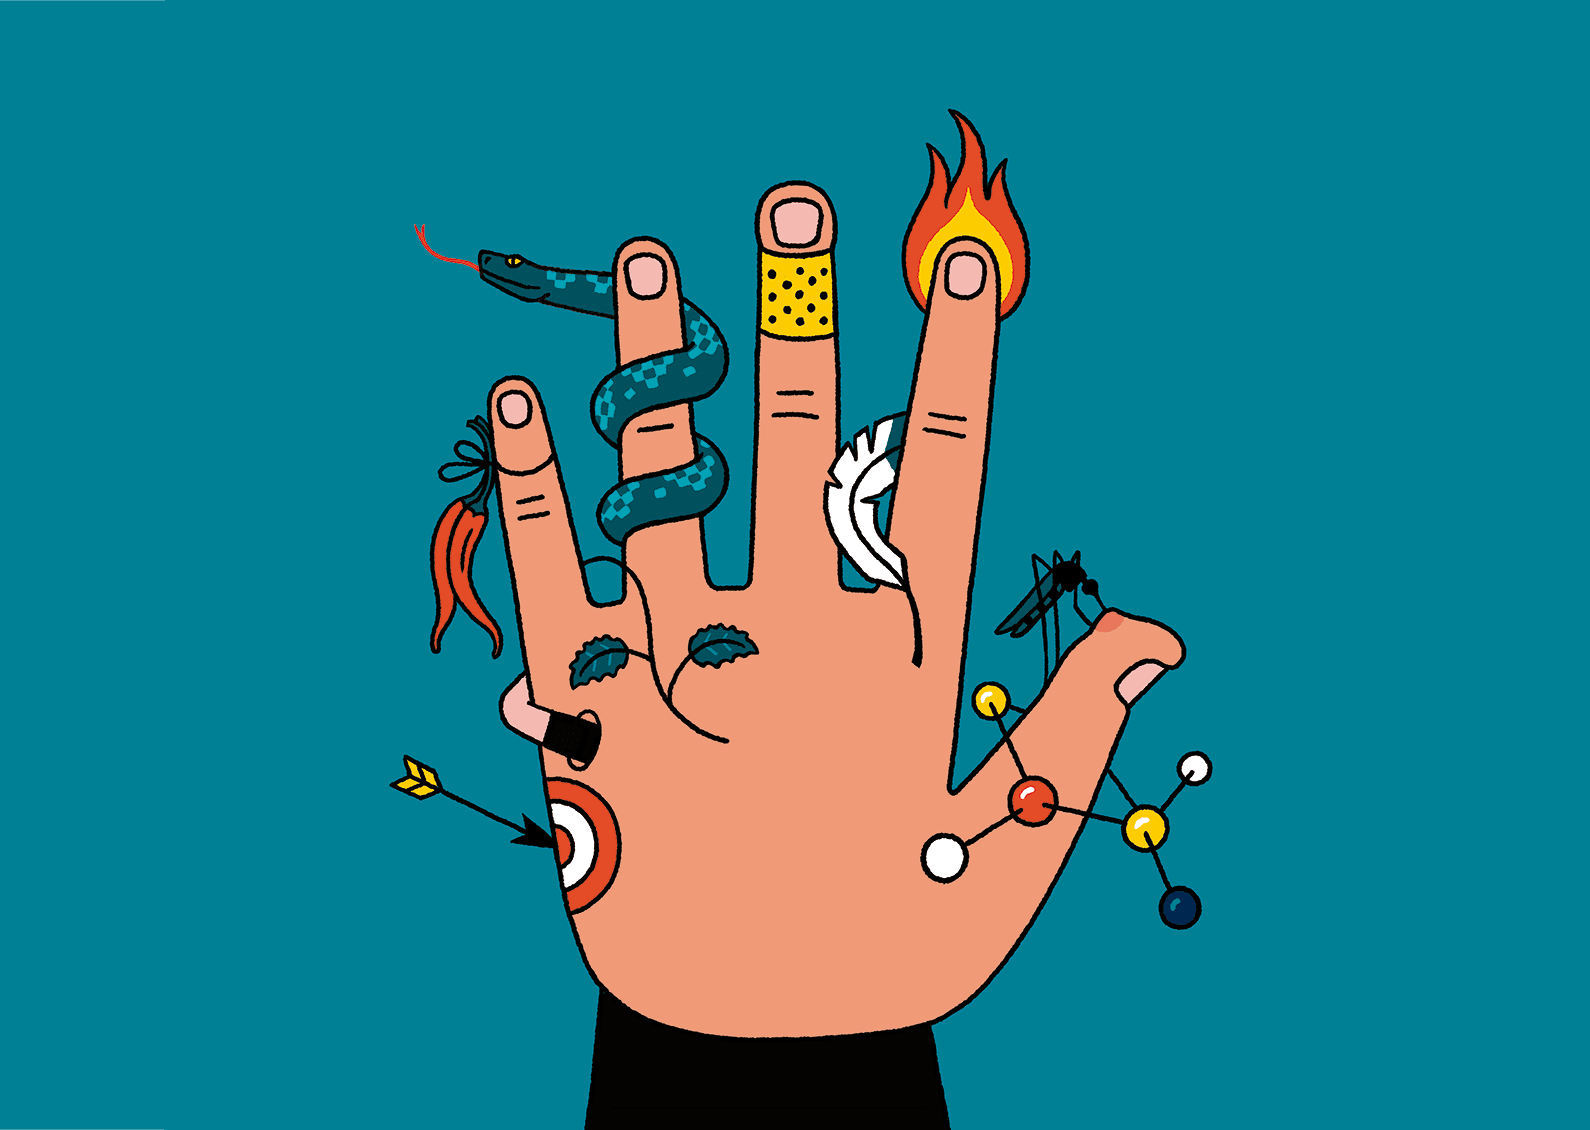 Illustration of the back of a hand with various stimuli, including a fire, mosquito, a feather, a snake, chili peppers, and a bandaid.